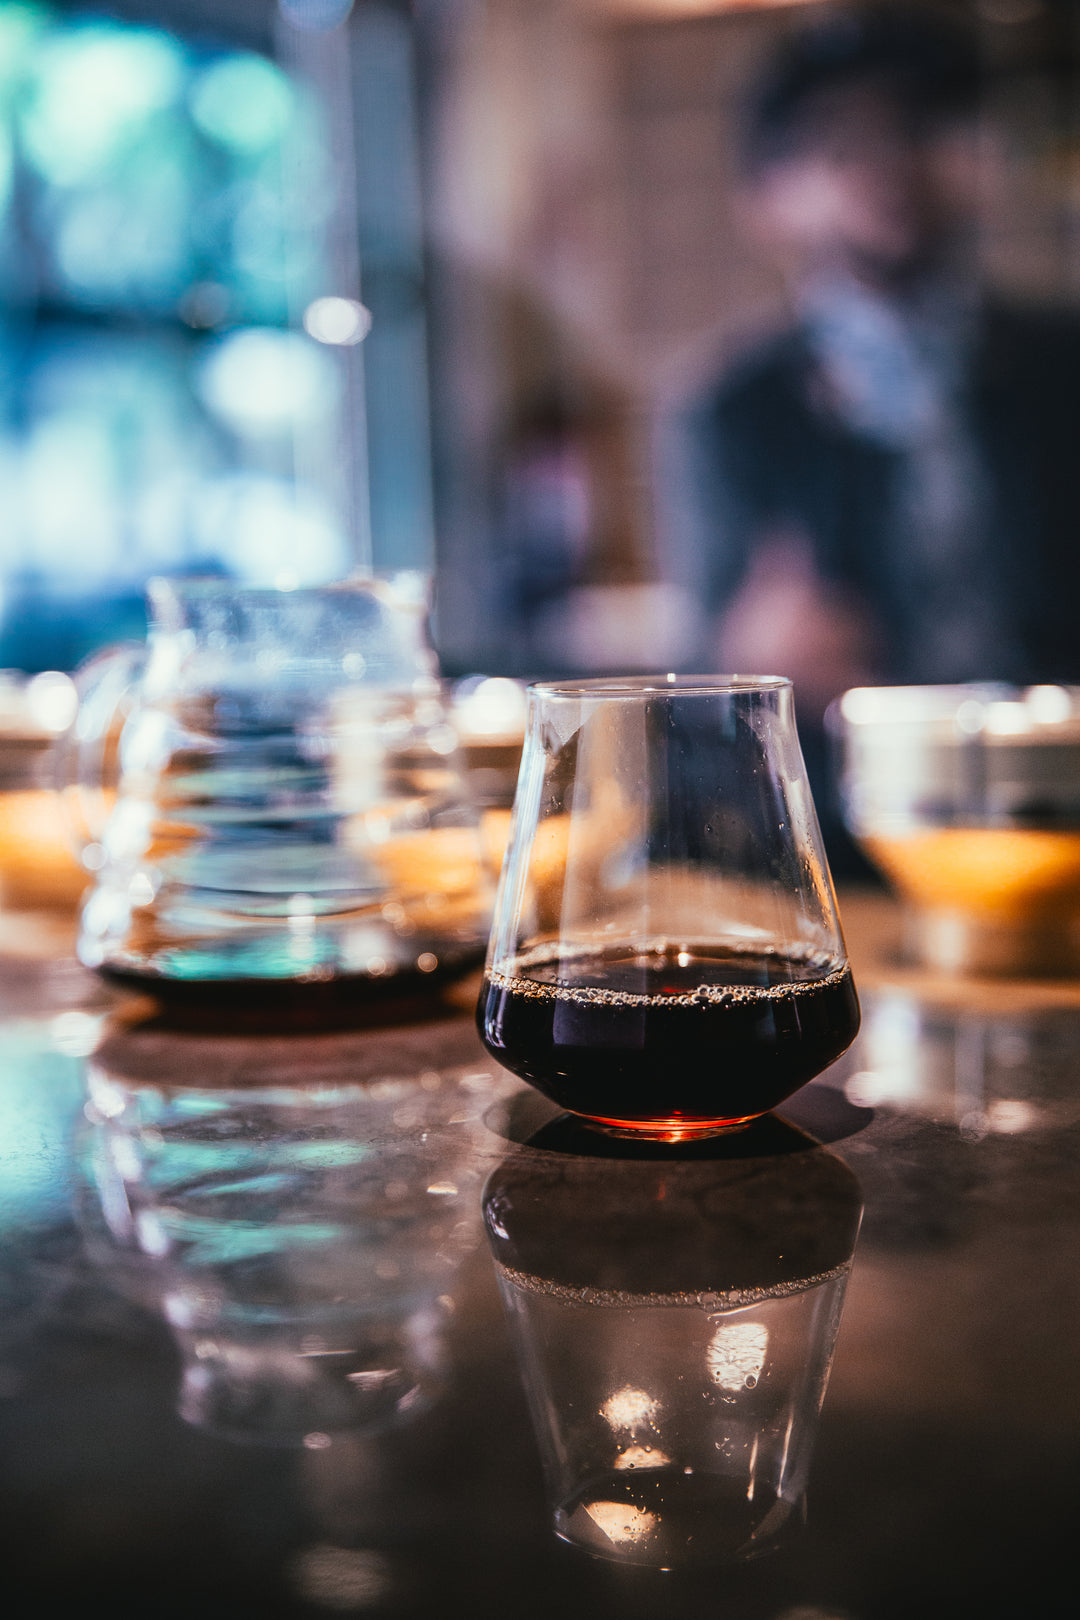 coffee-process-with-glassware-at-cafe